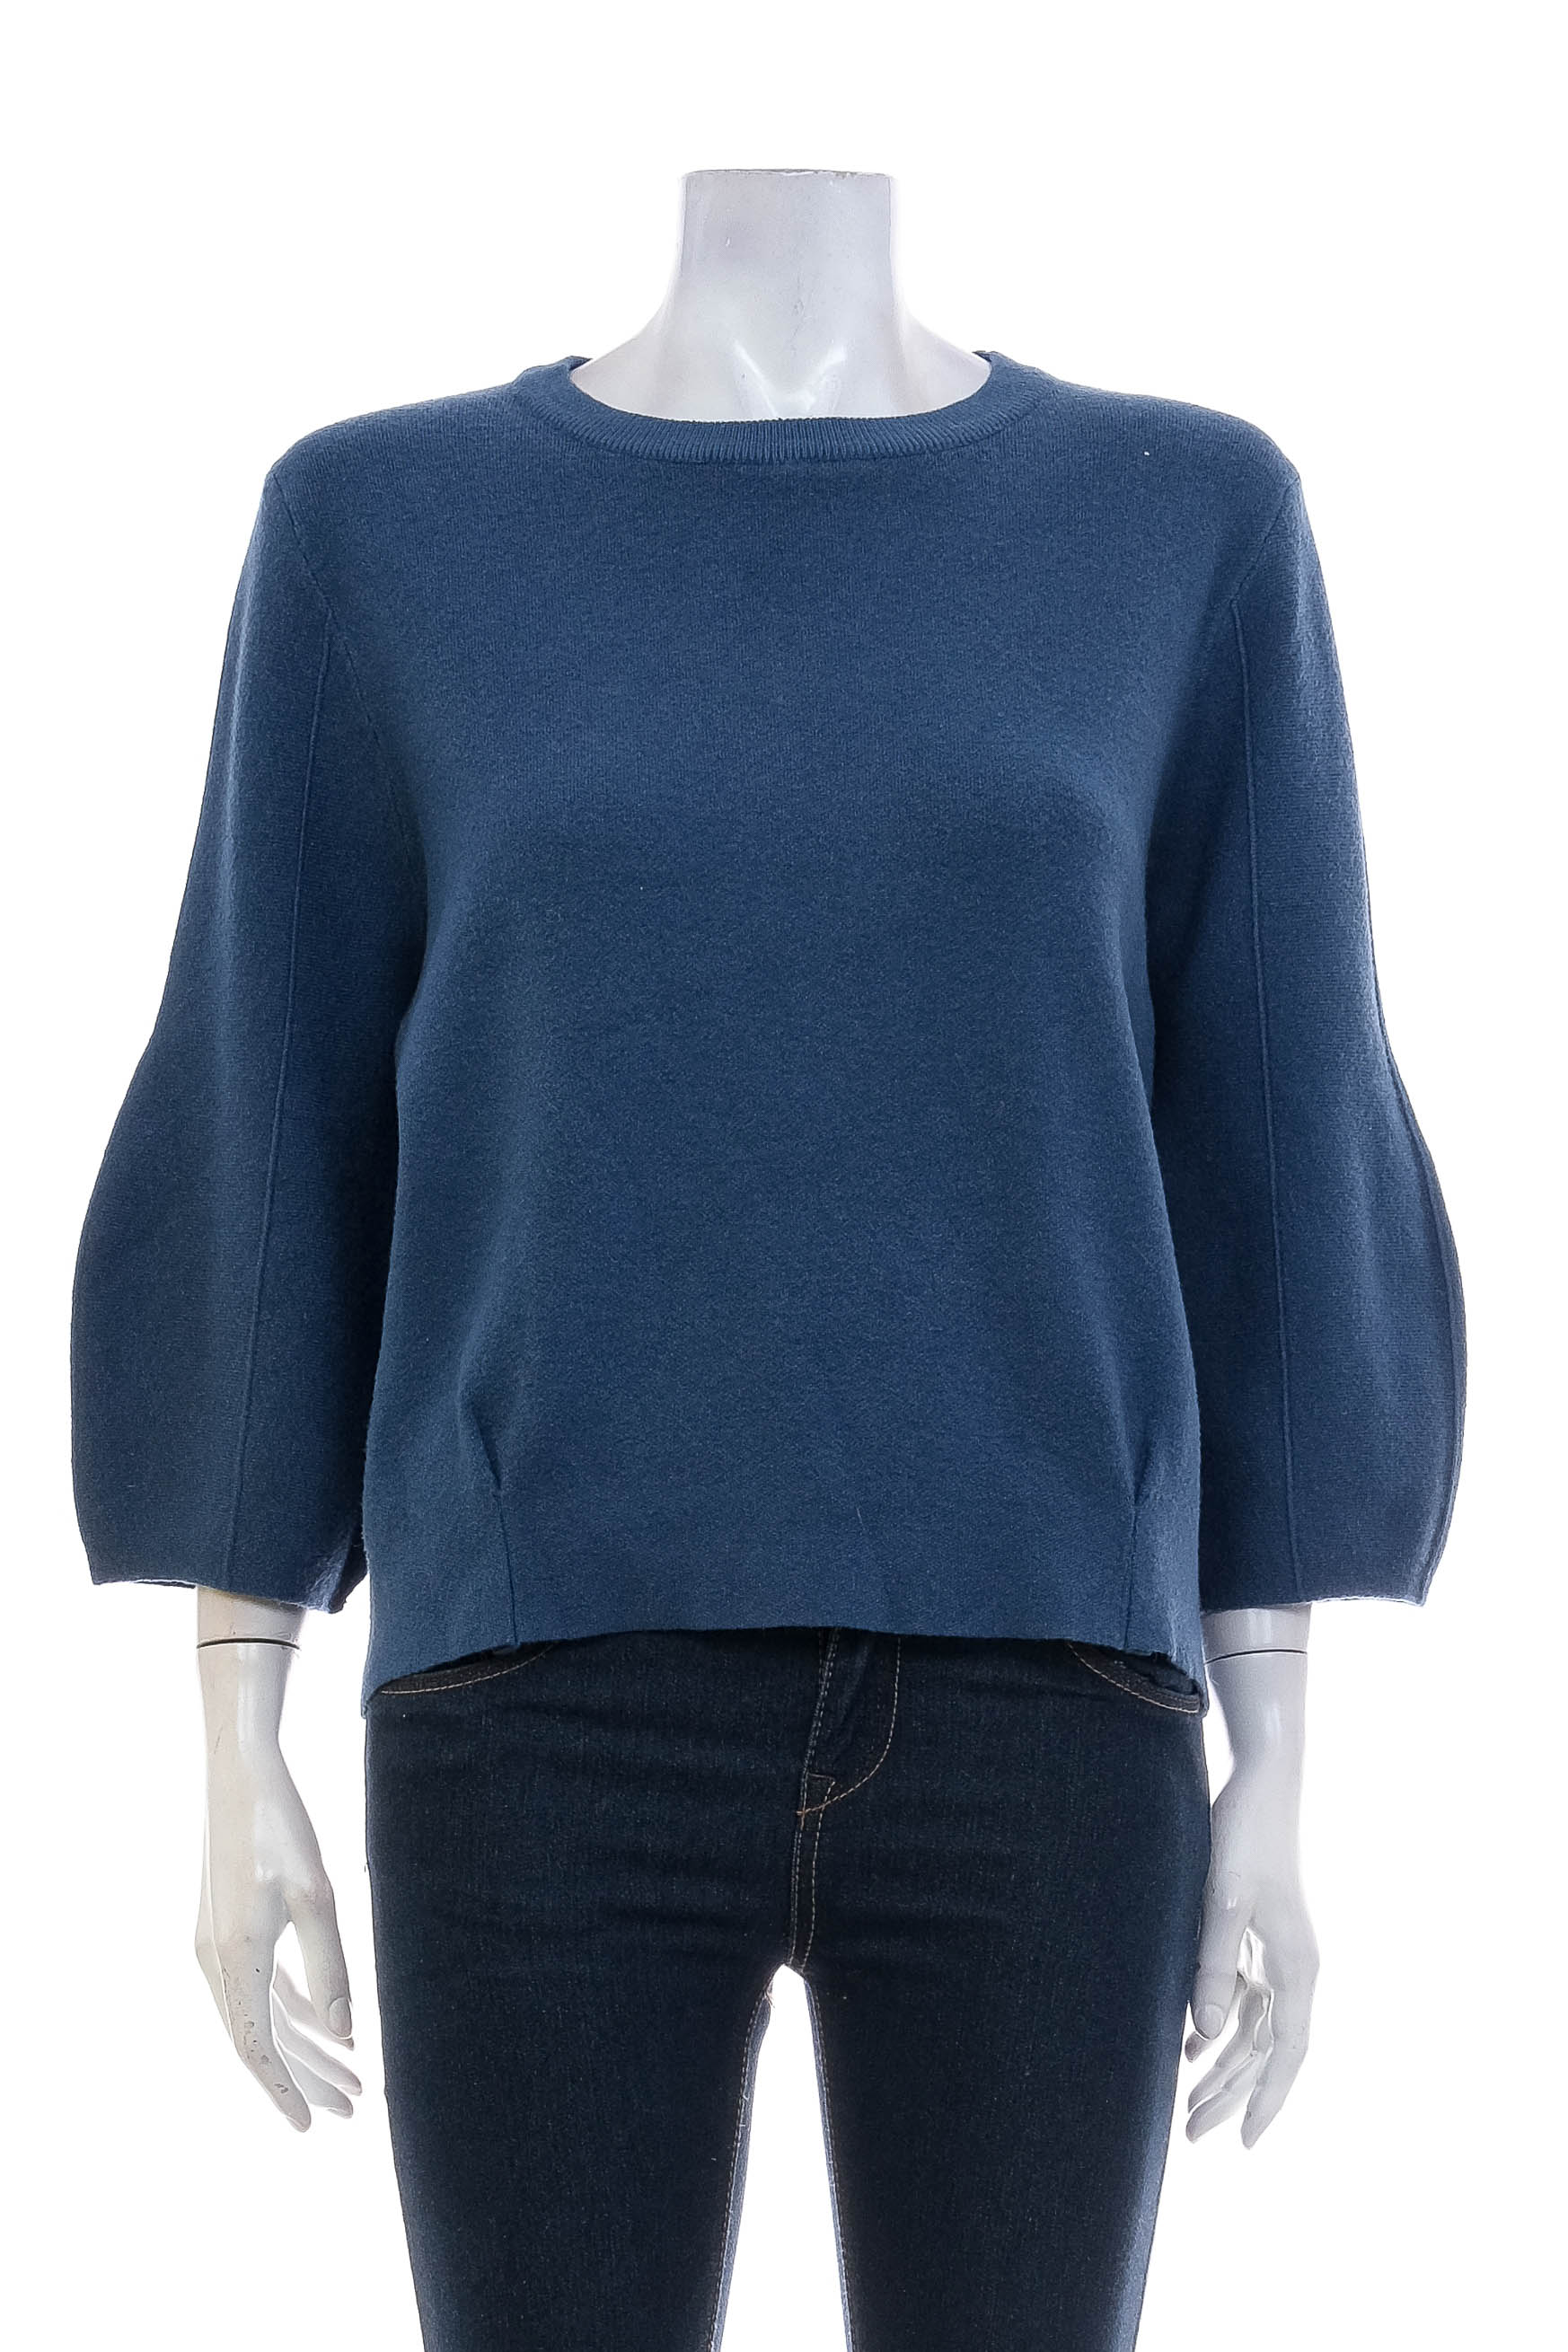 Women's sweater - & Other - 0